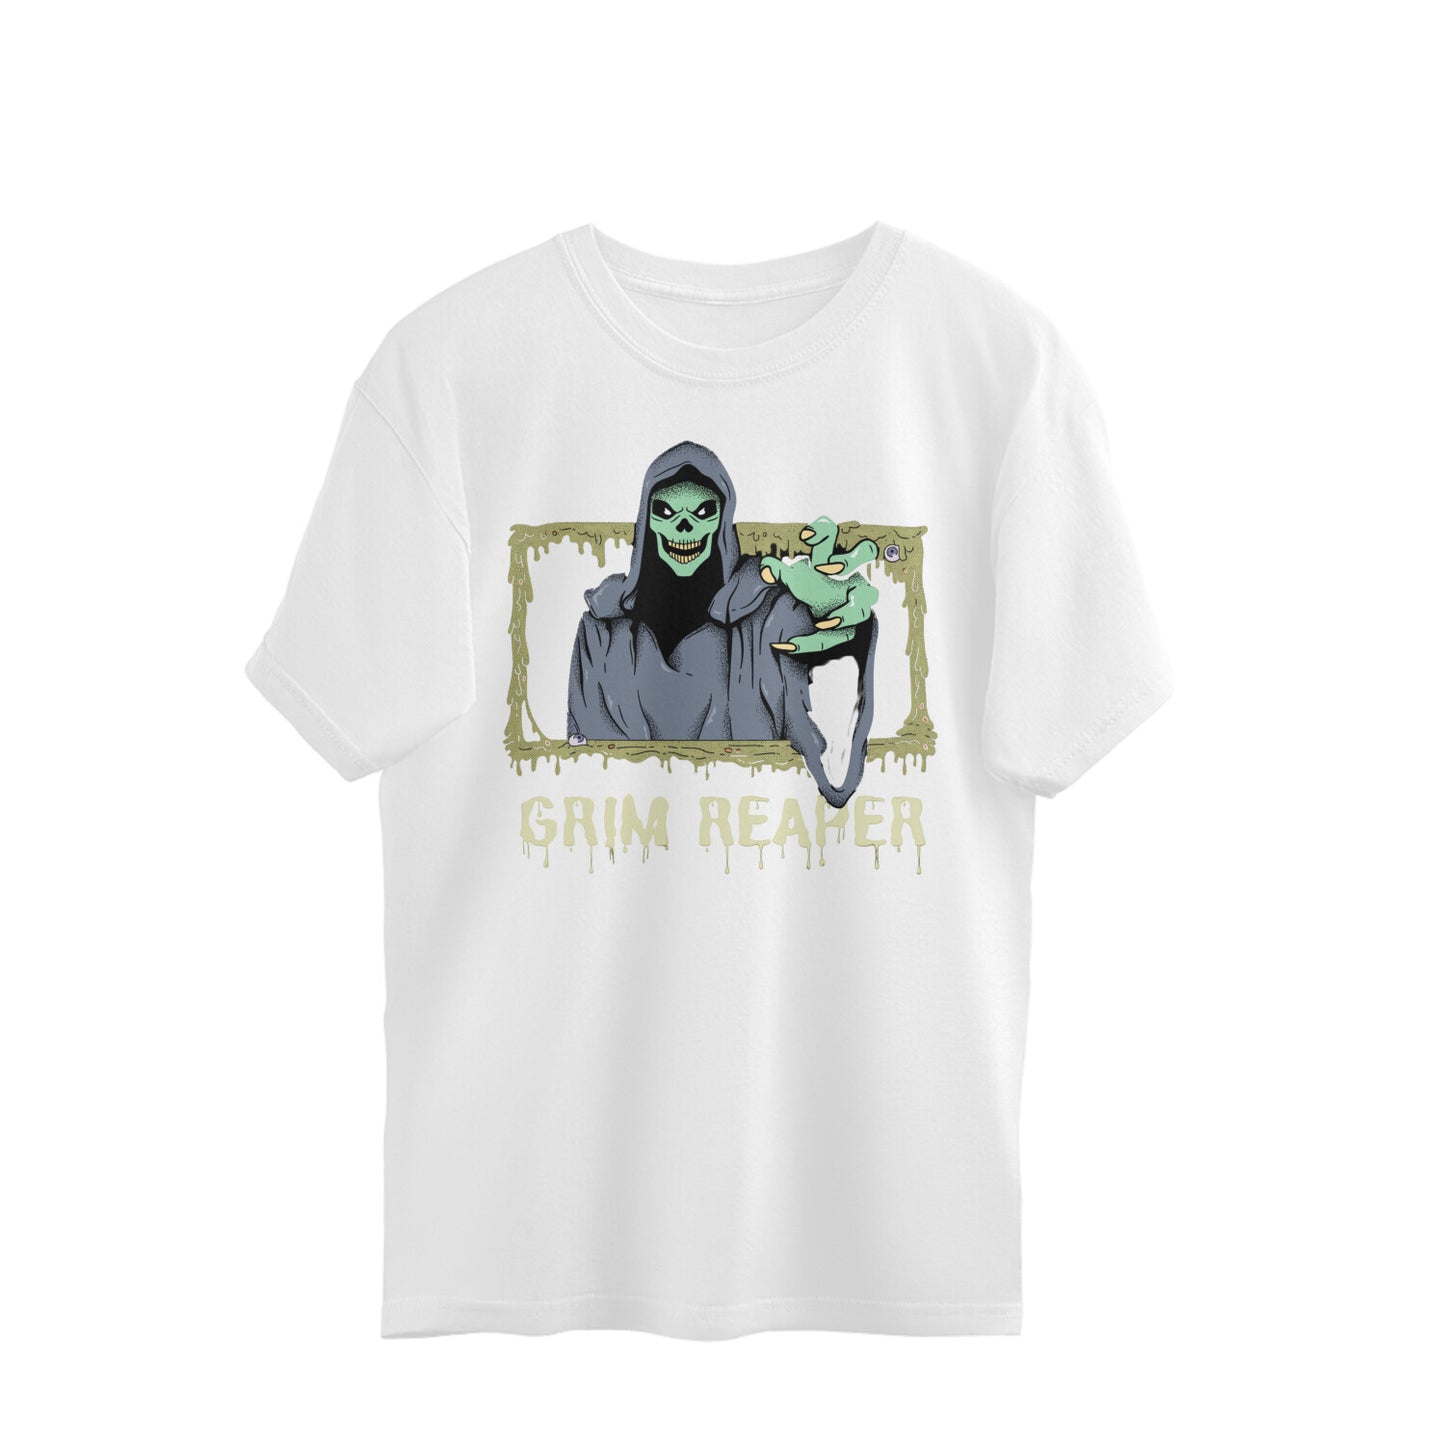 Grim Reaper Over sized T-shirt